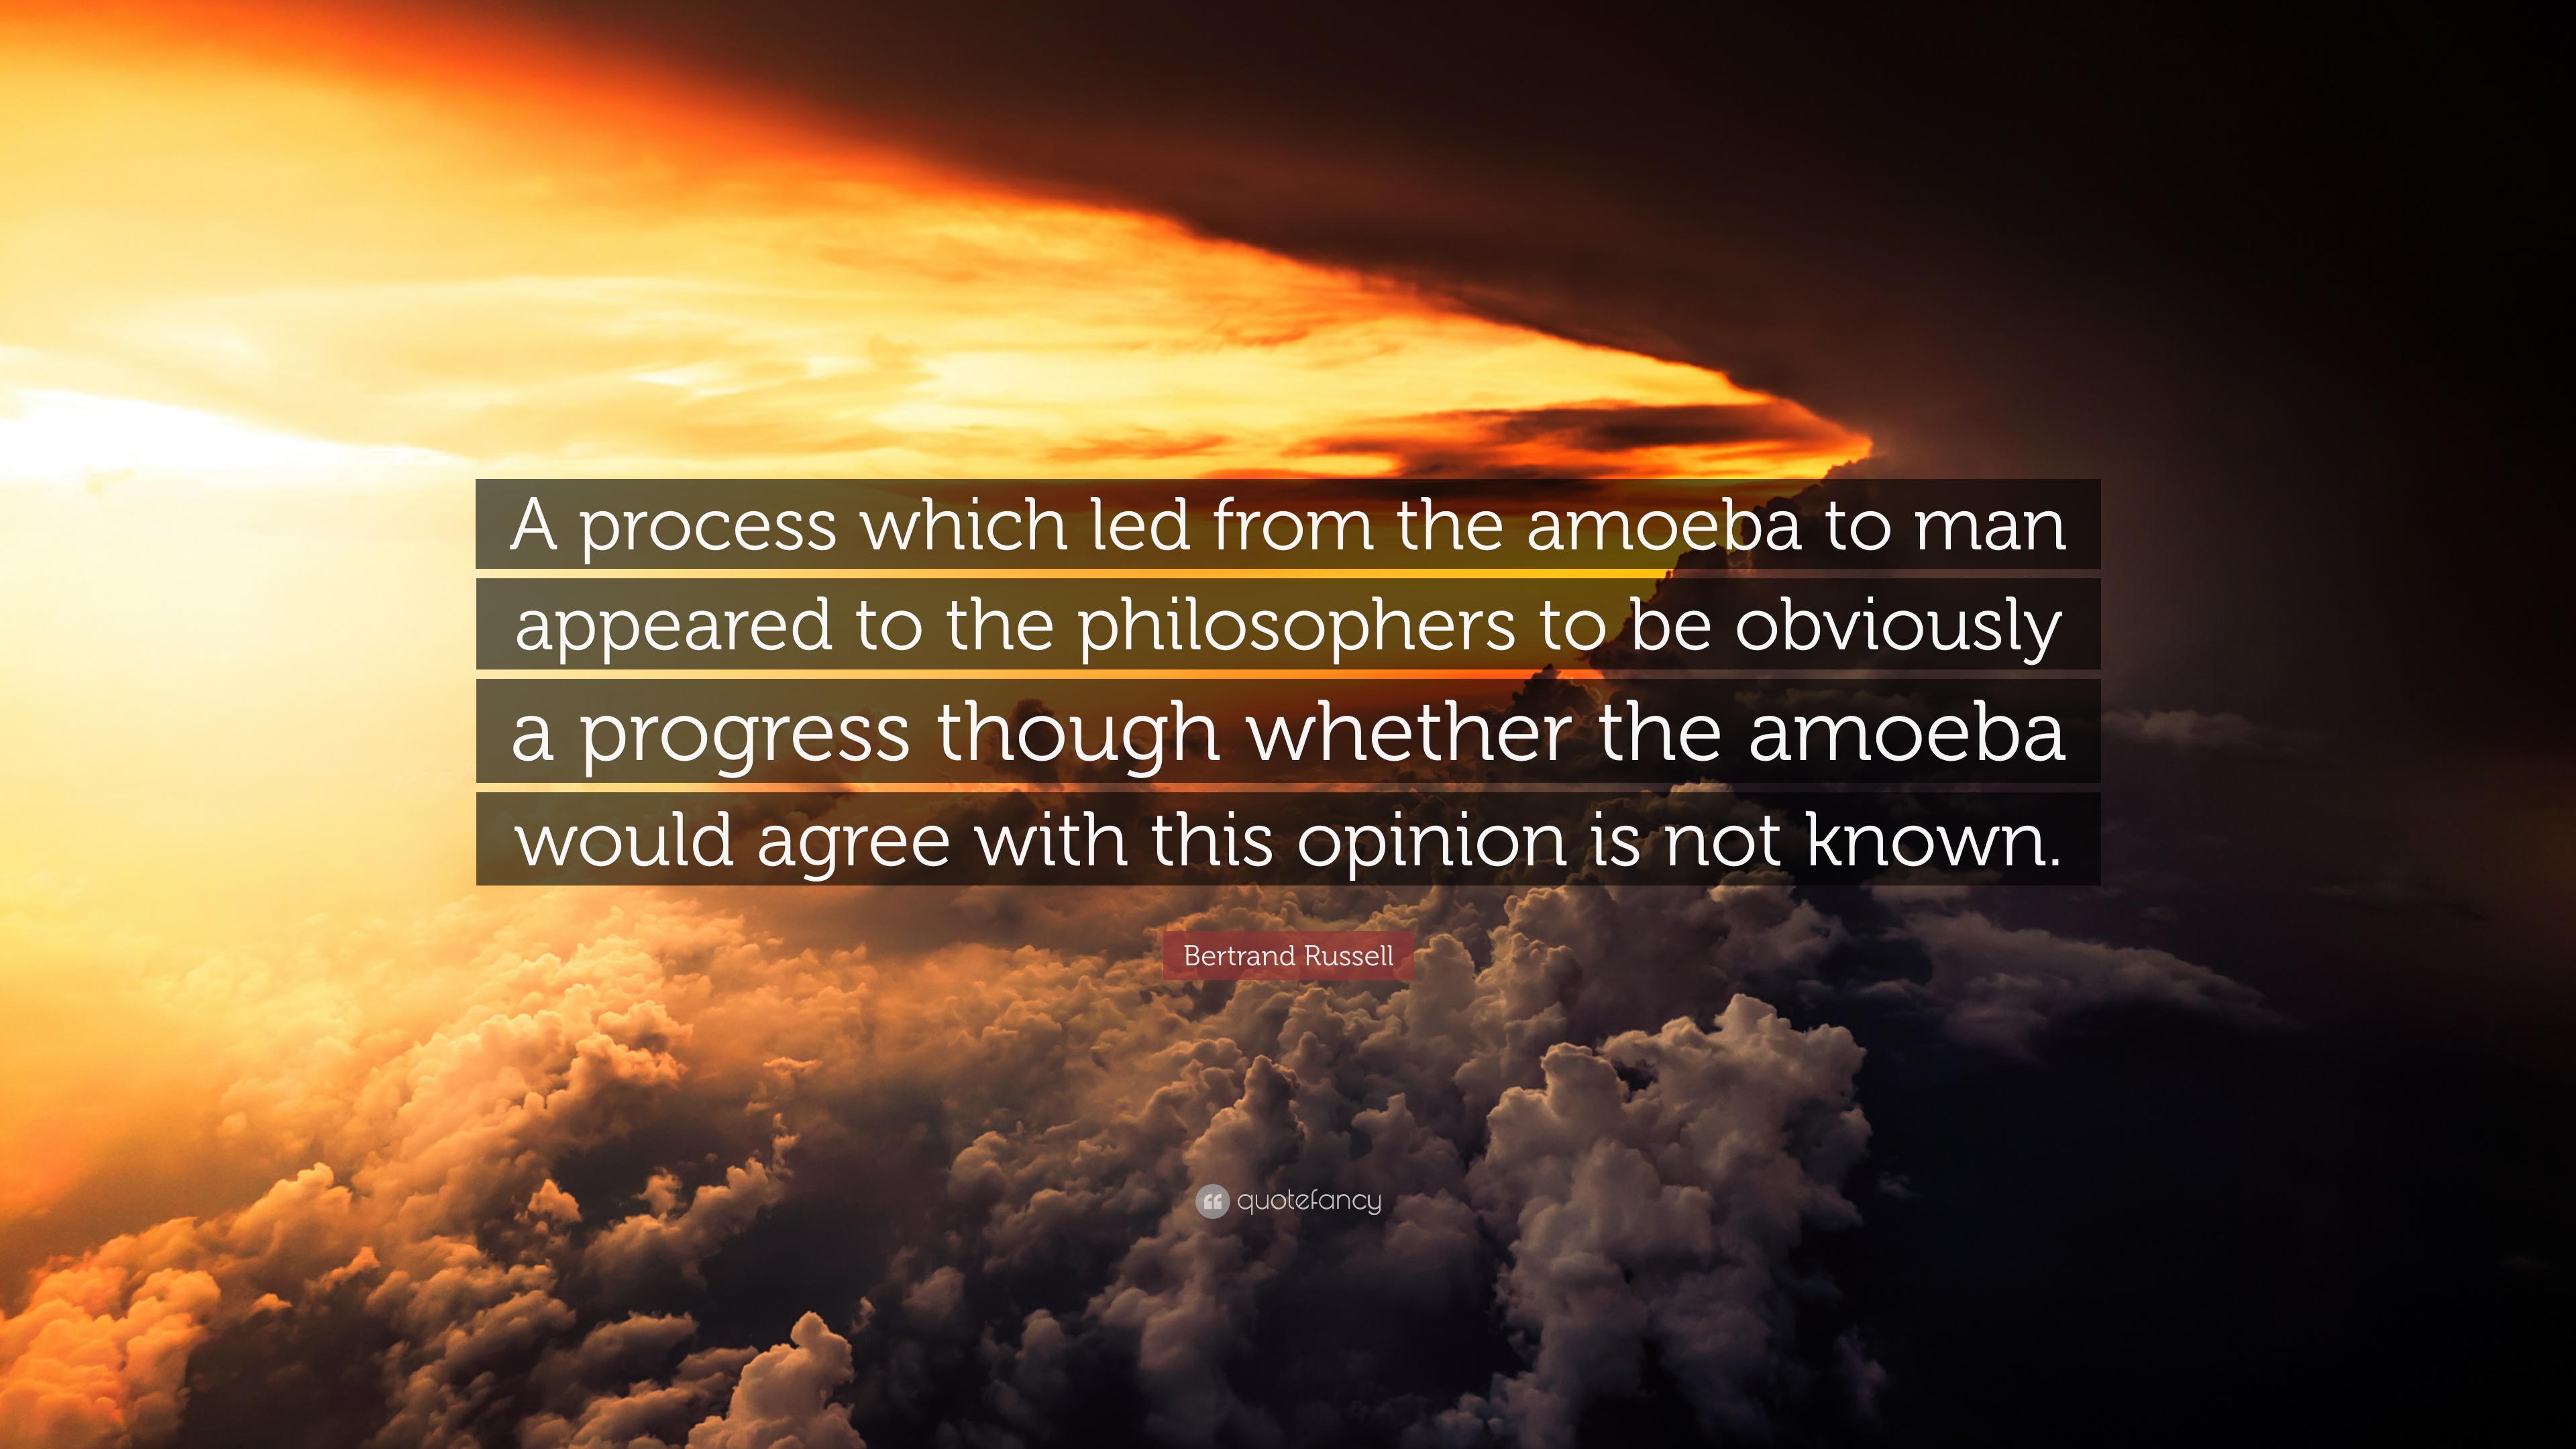 Bertrand Russell Quote: “A process which led from the amoeba